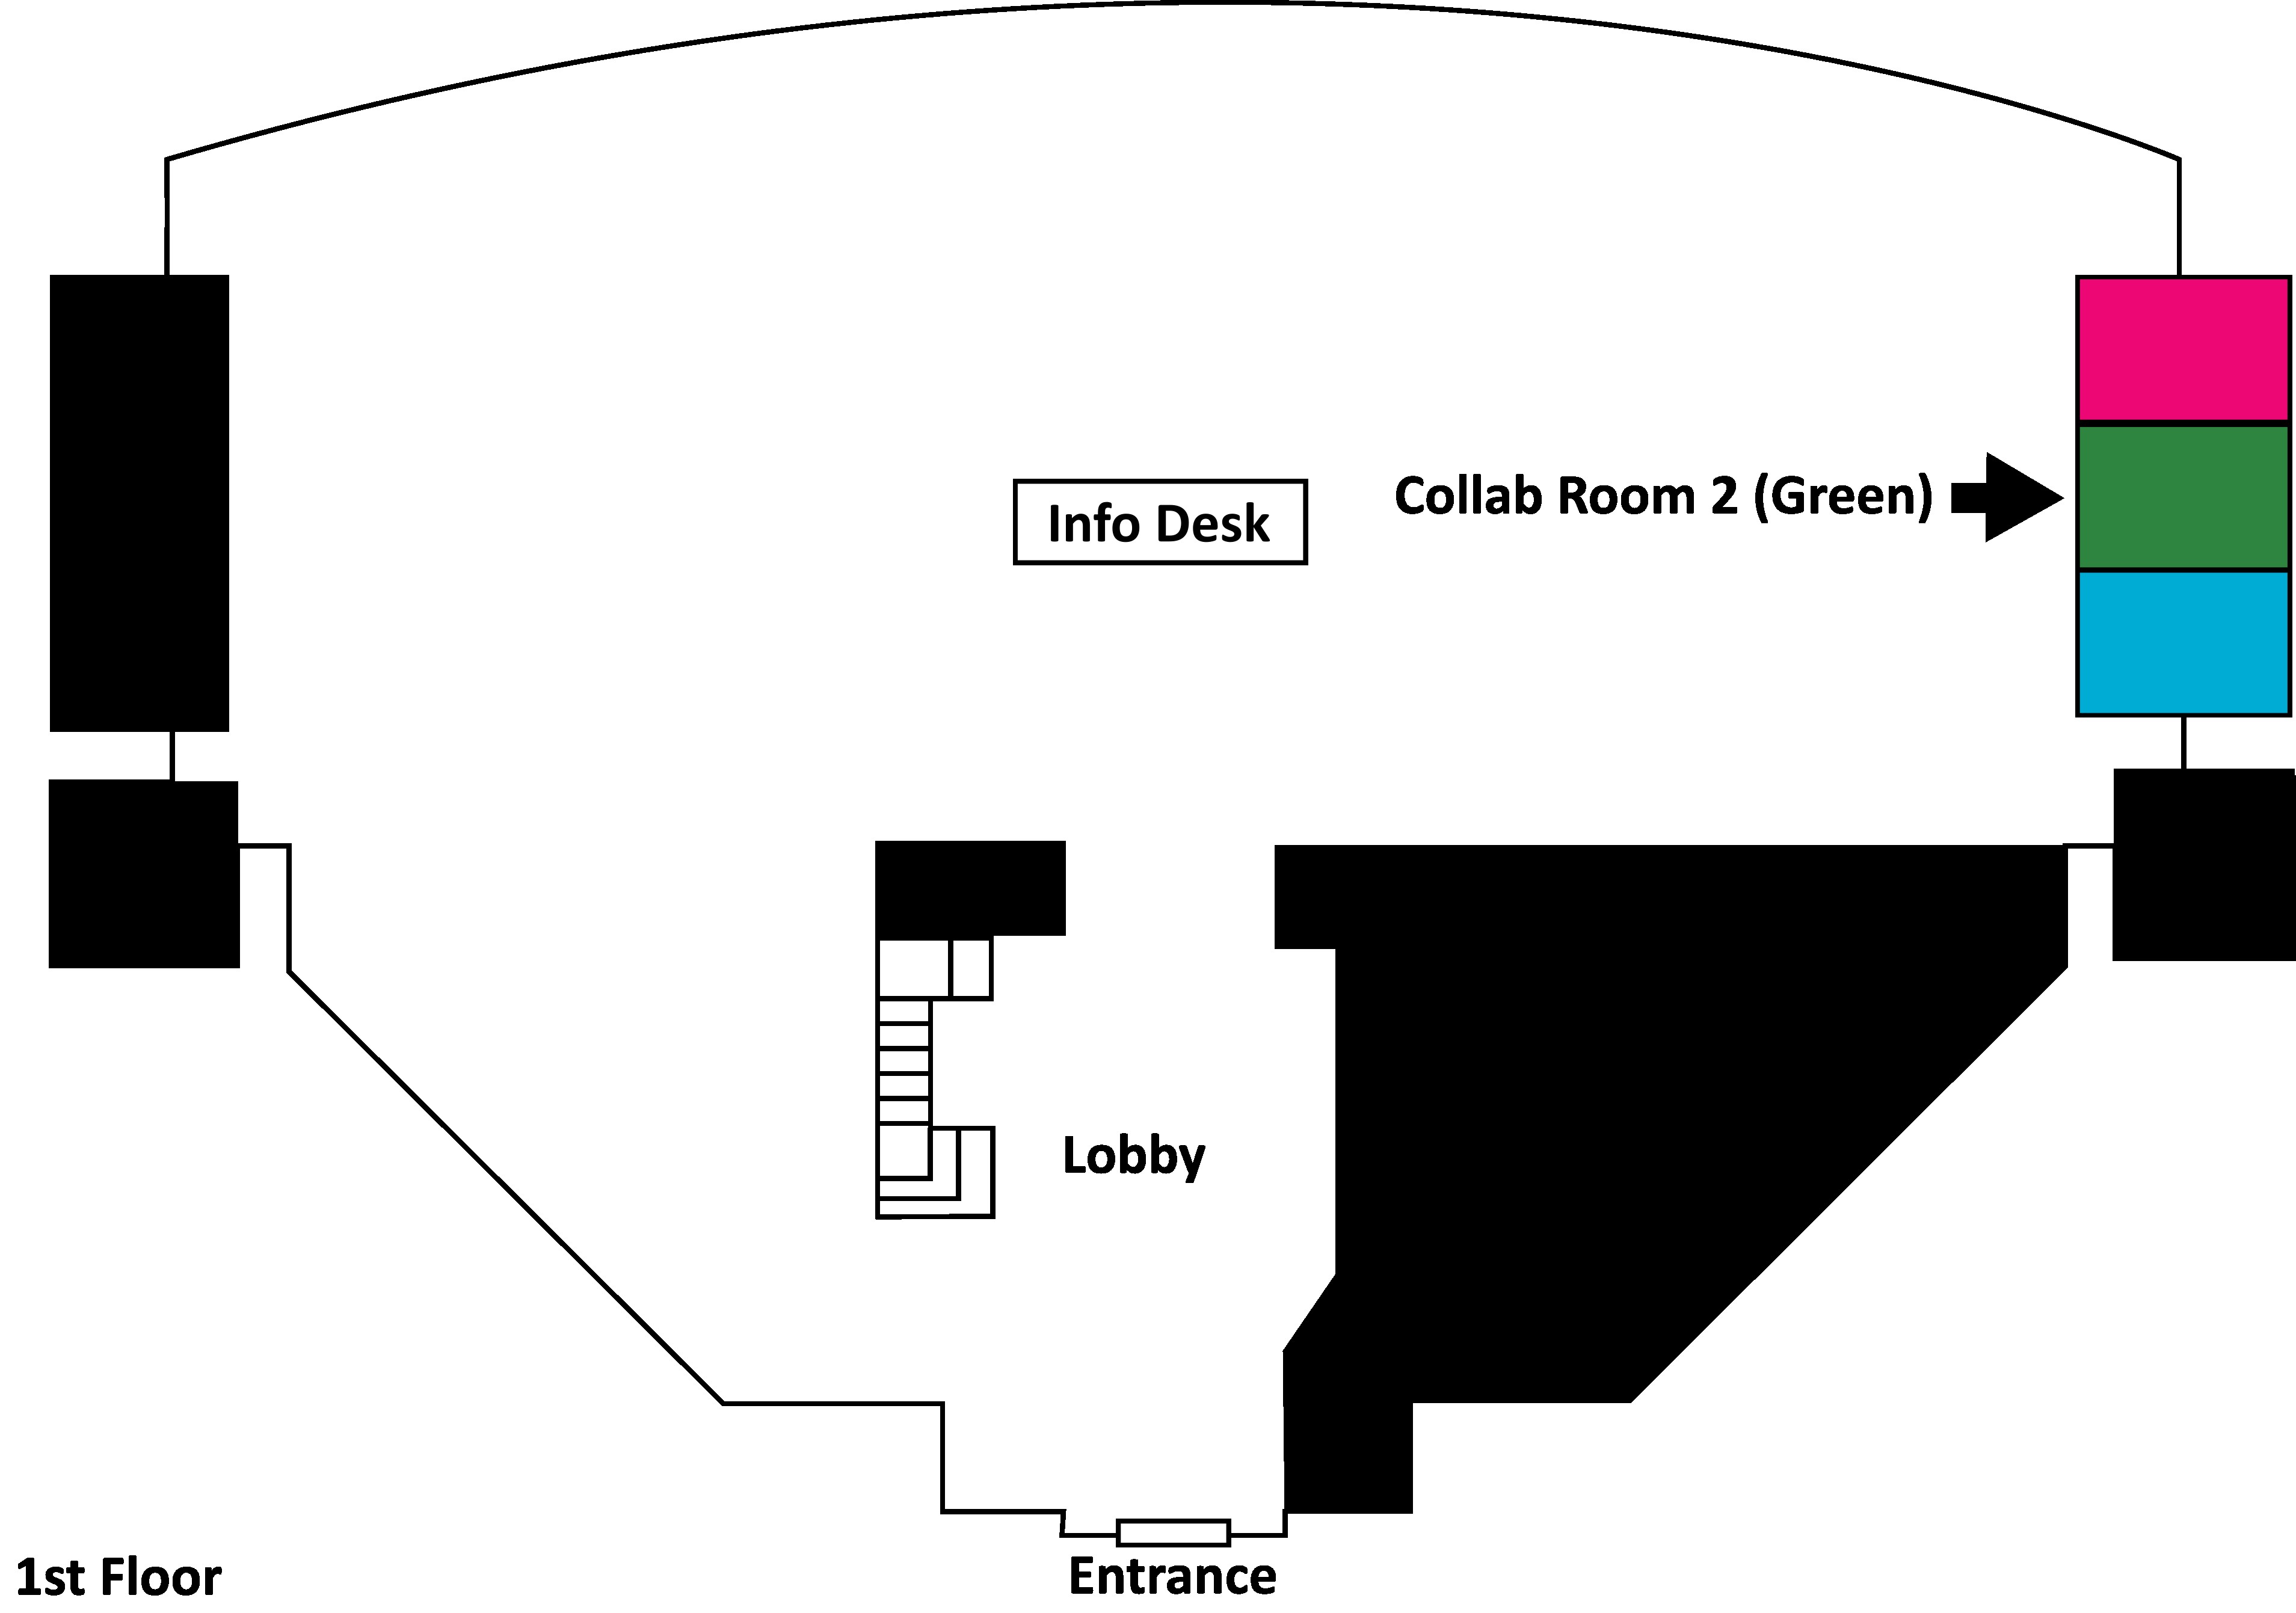 A map of the first floor of the library. An arrow is pointing to a green room on the right side of the library. There is a pink and blue room above and below the green room respectively.